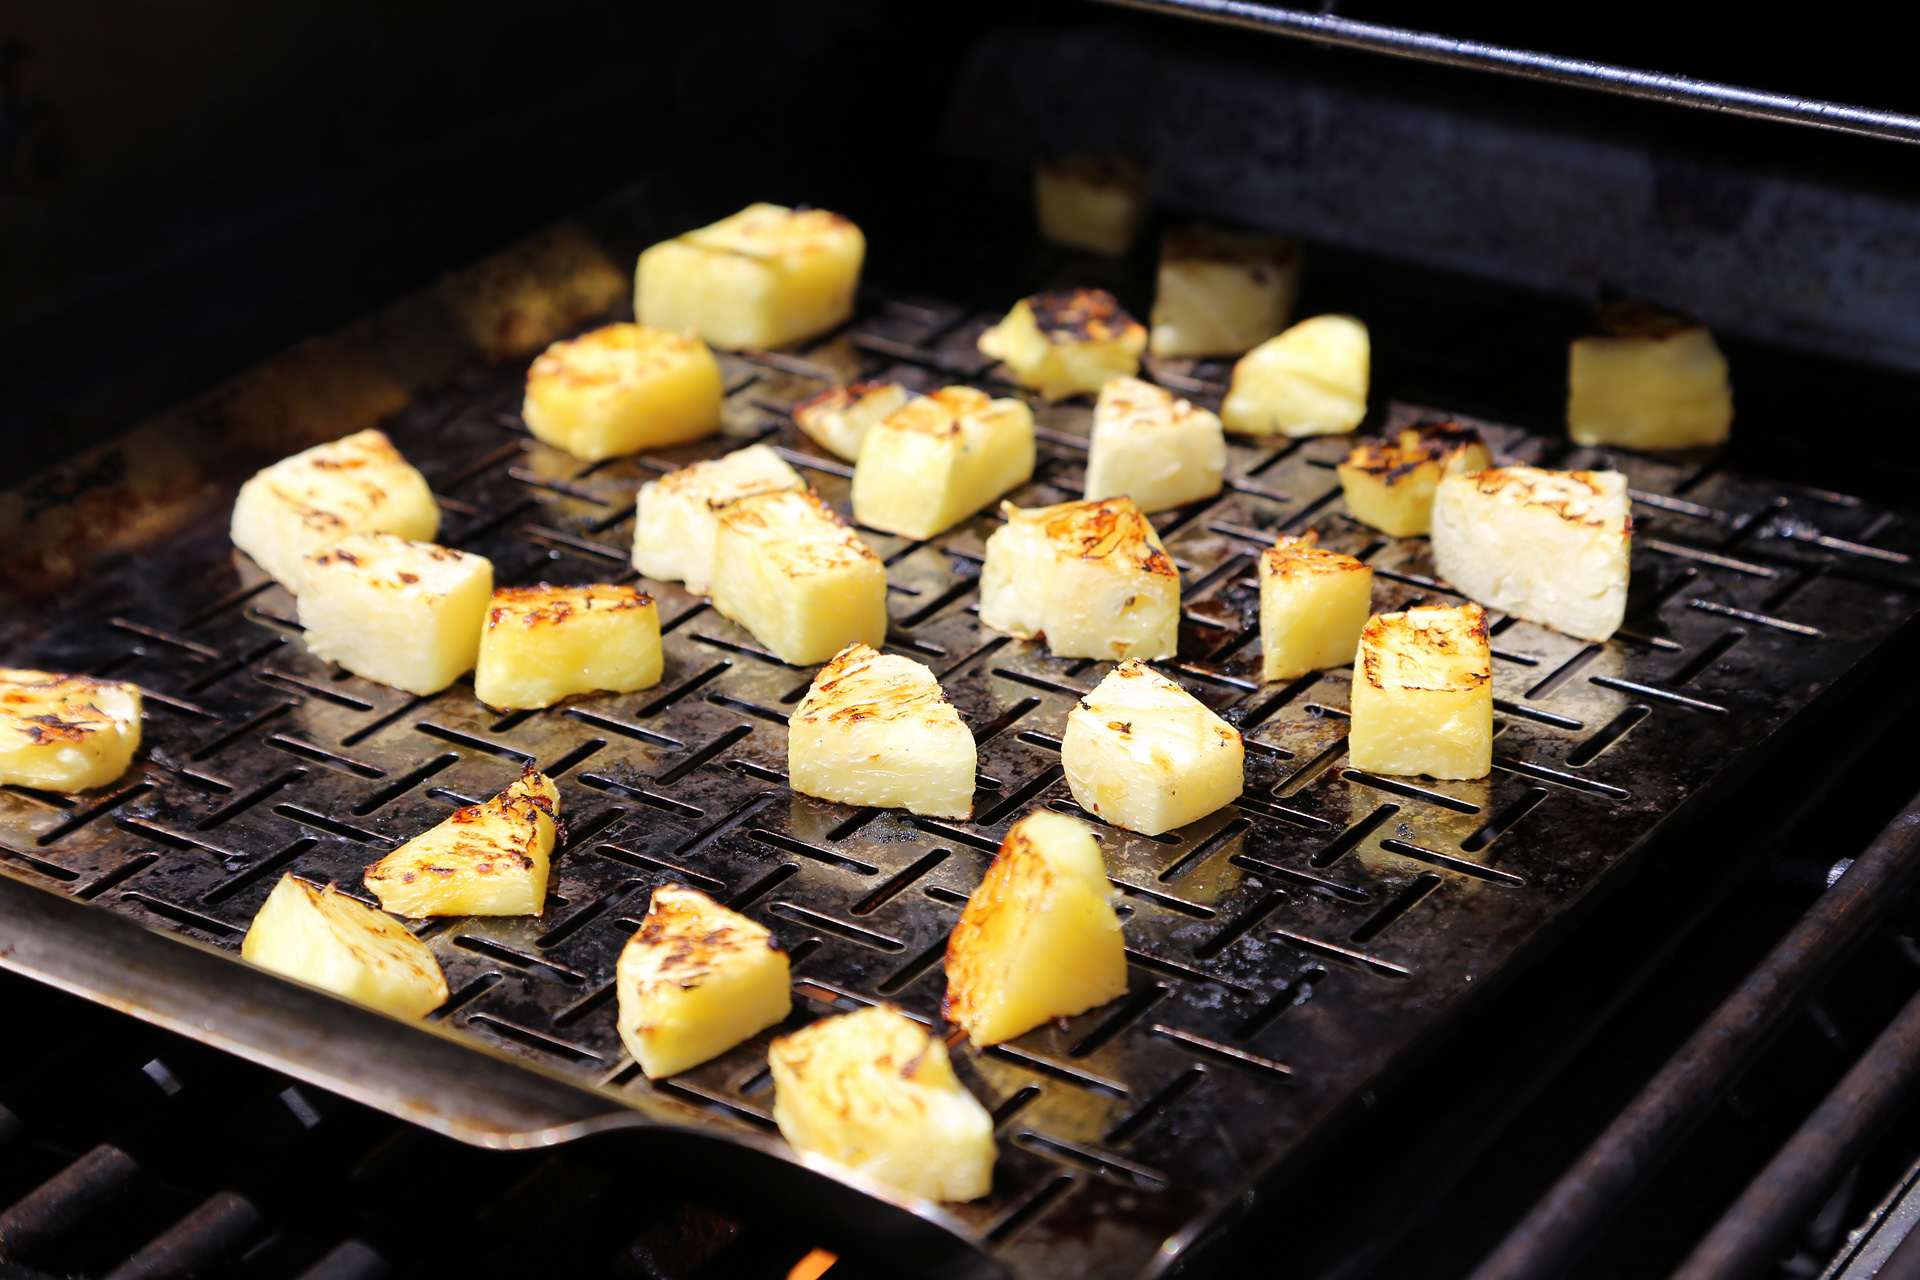 Using a perforated grill pan, grill the pineapple over direct heat until charred, about 7 minutes.